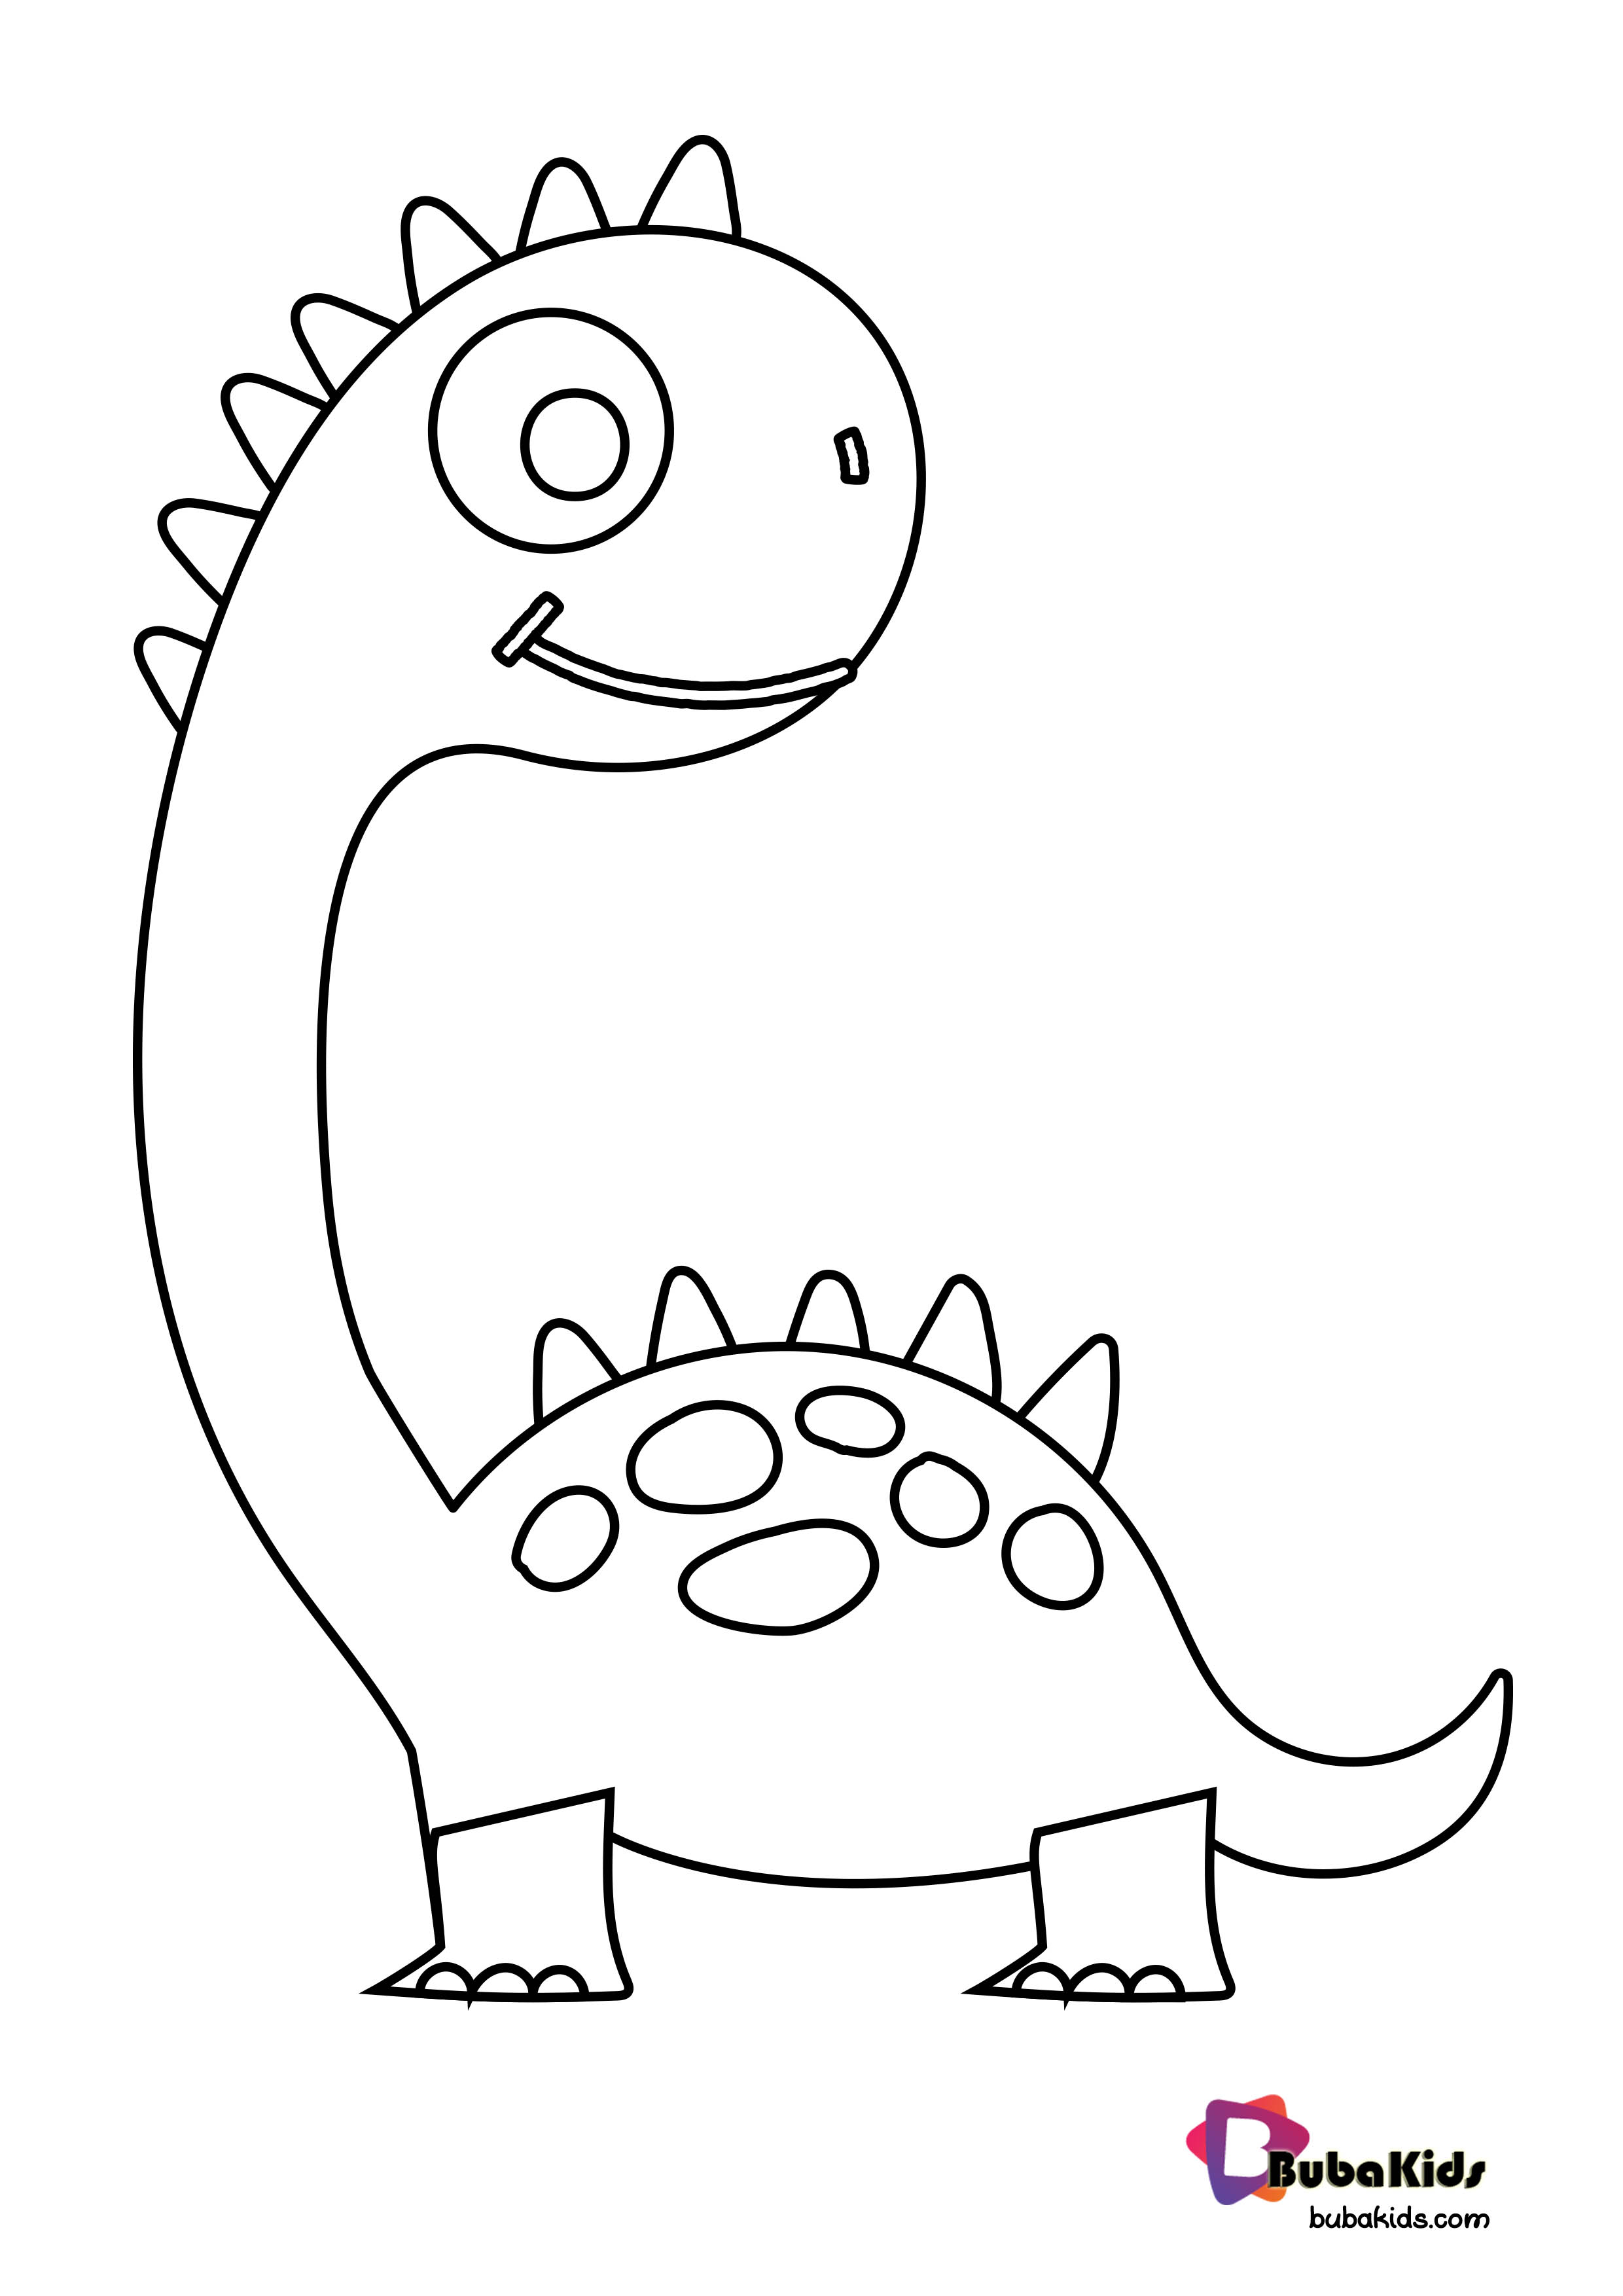 Cute Dinosaurs Coloring Page For Kids Wallpaper